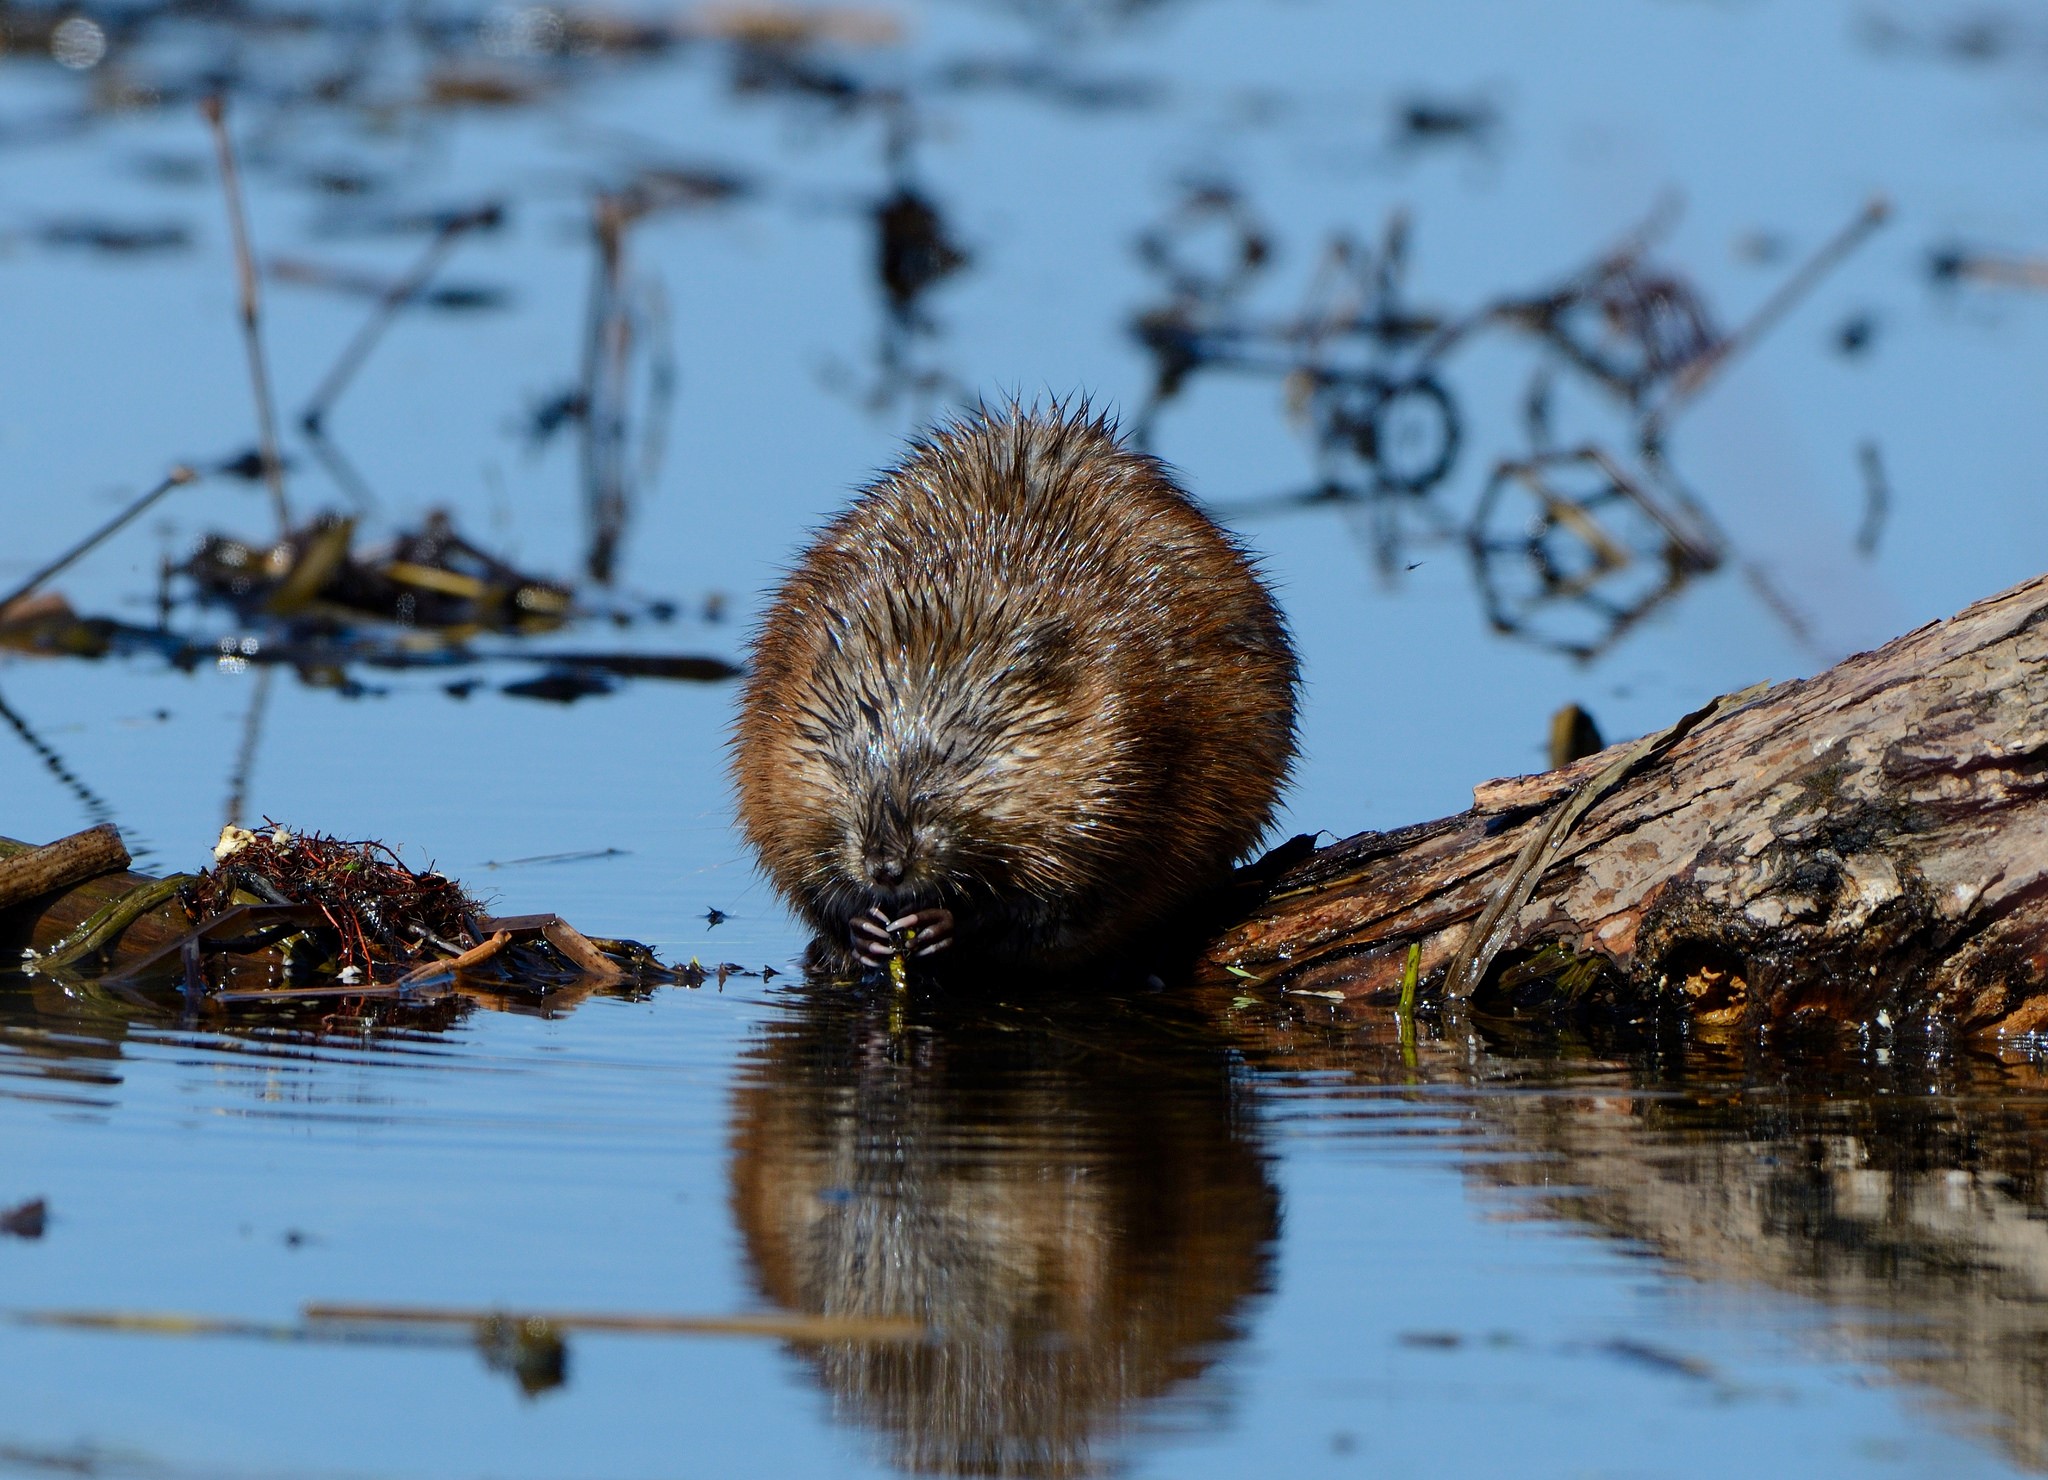 A muskrat happily eats a plant snack. Credit: Dave Inman